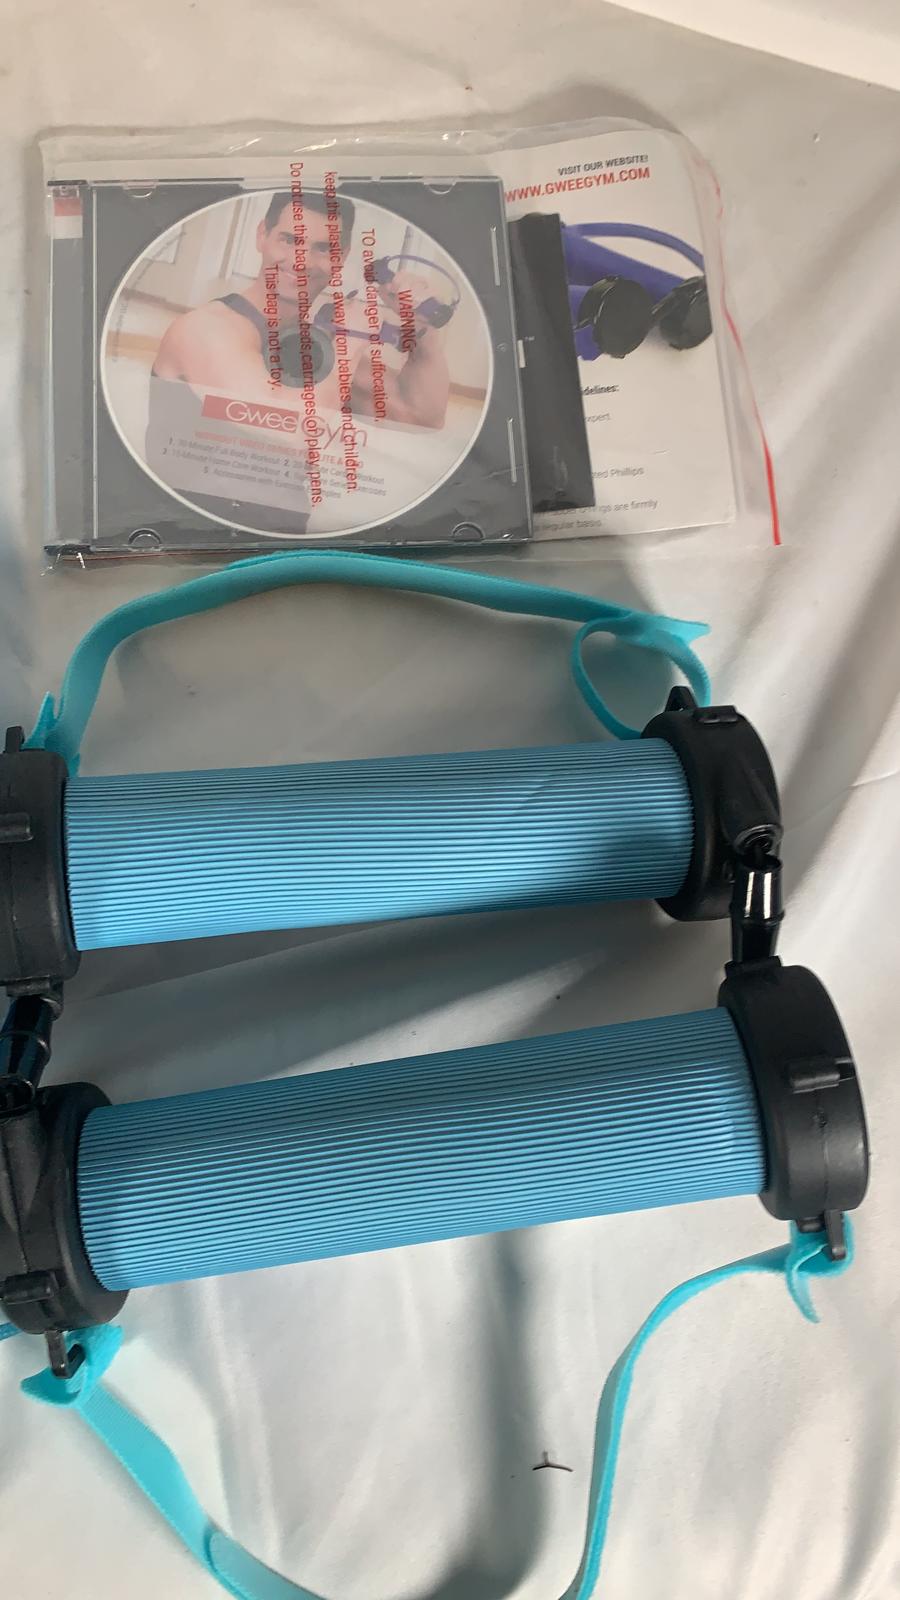 Gwee Gym Lite Resistance Band Workout System with DVD and Echelon App